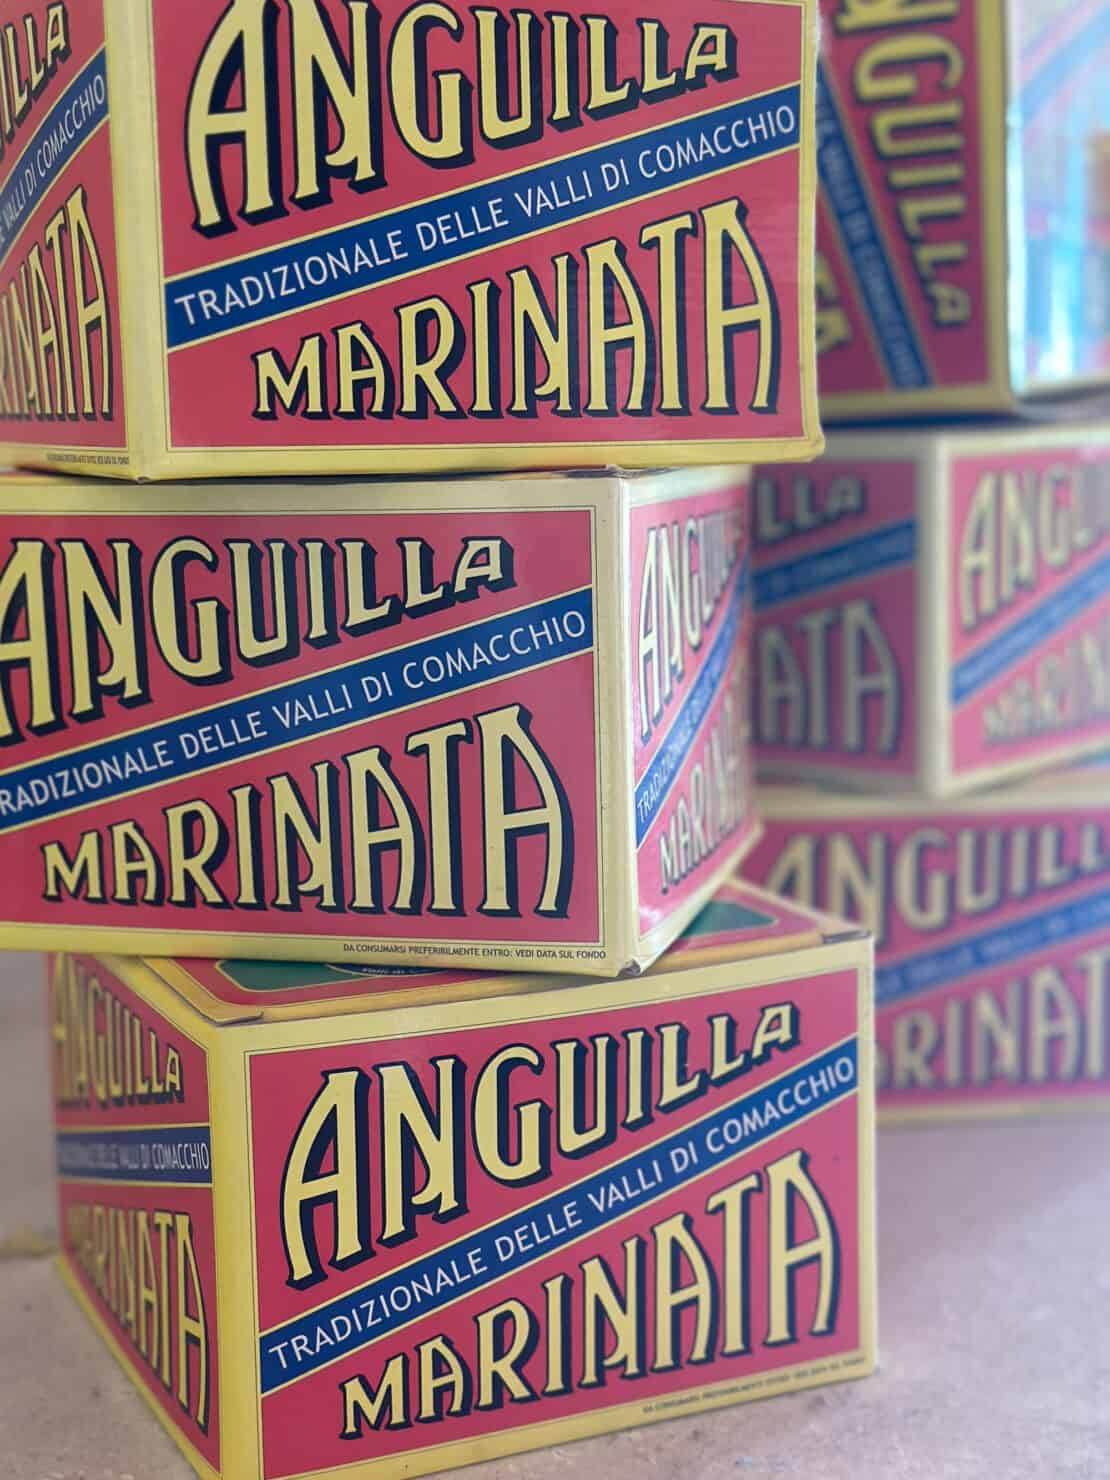 Boxes of marinated eels or anguilla marinata a traditional delicacy in Comacchio Italy